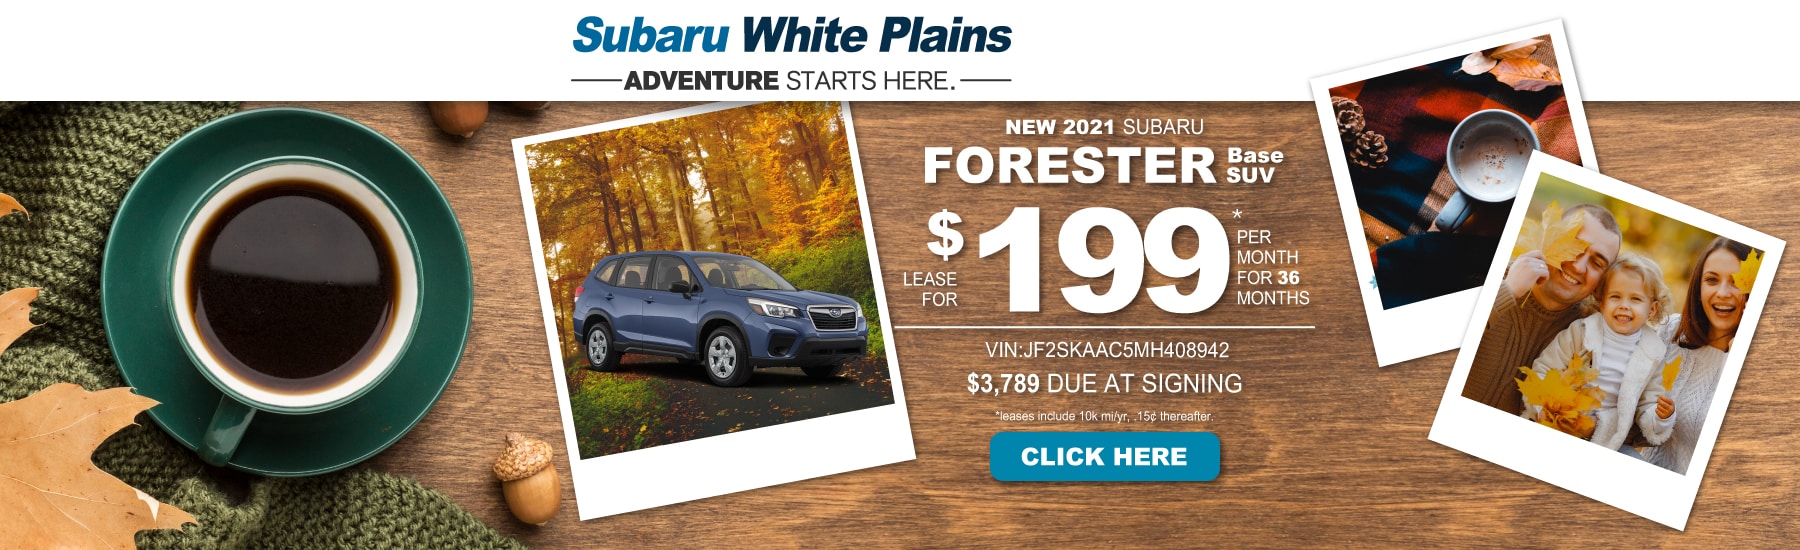 Our Best Subaru Forester Lease Deals of 2020